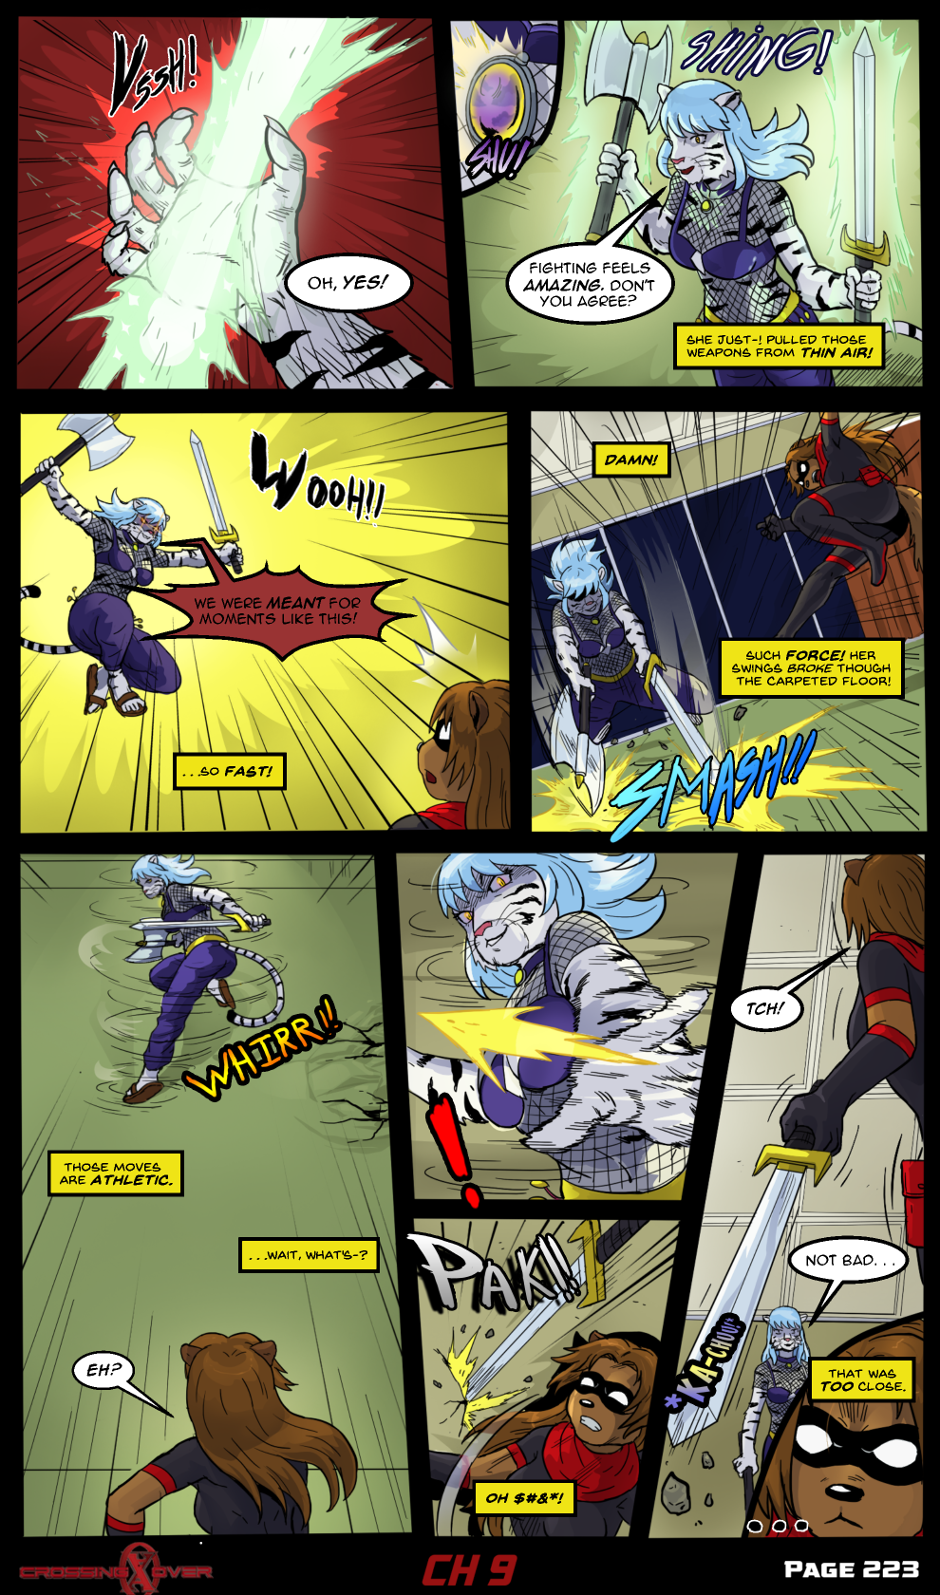 Page 223 (Ch 9)